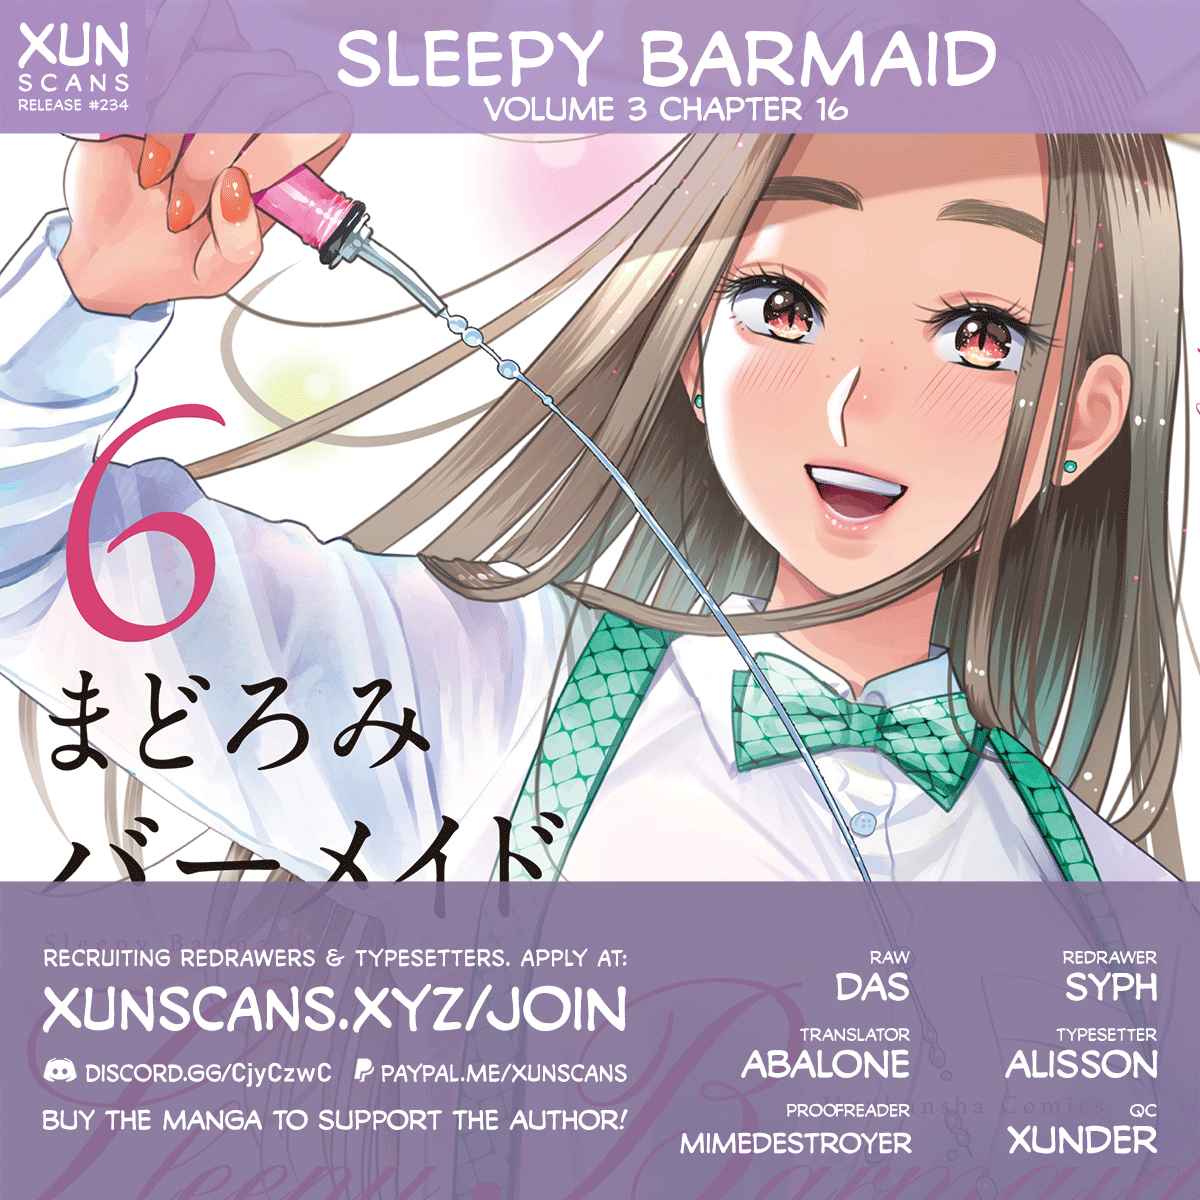 Sleepy Barmaid Vol. 3 Ch. 16 Red and White